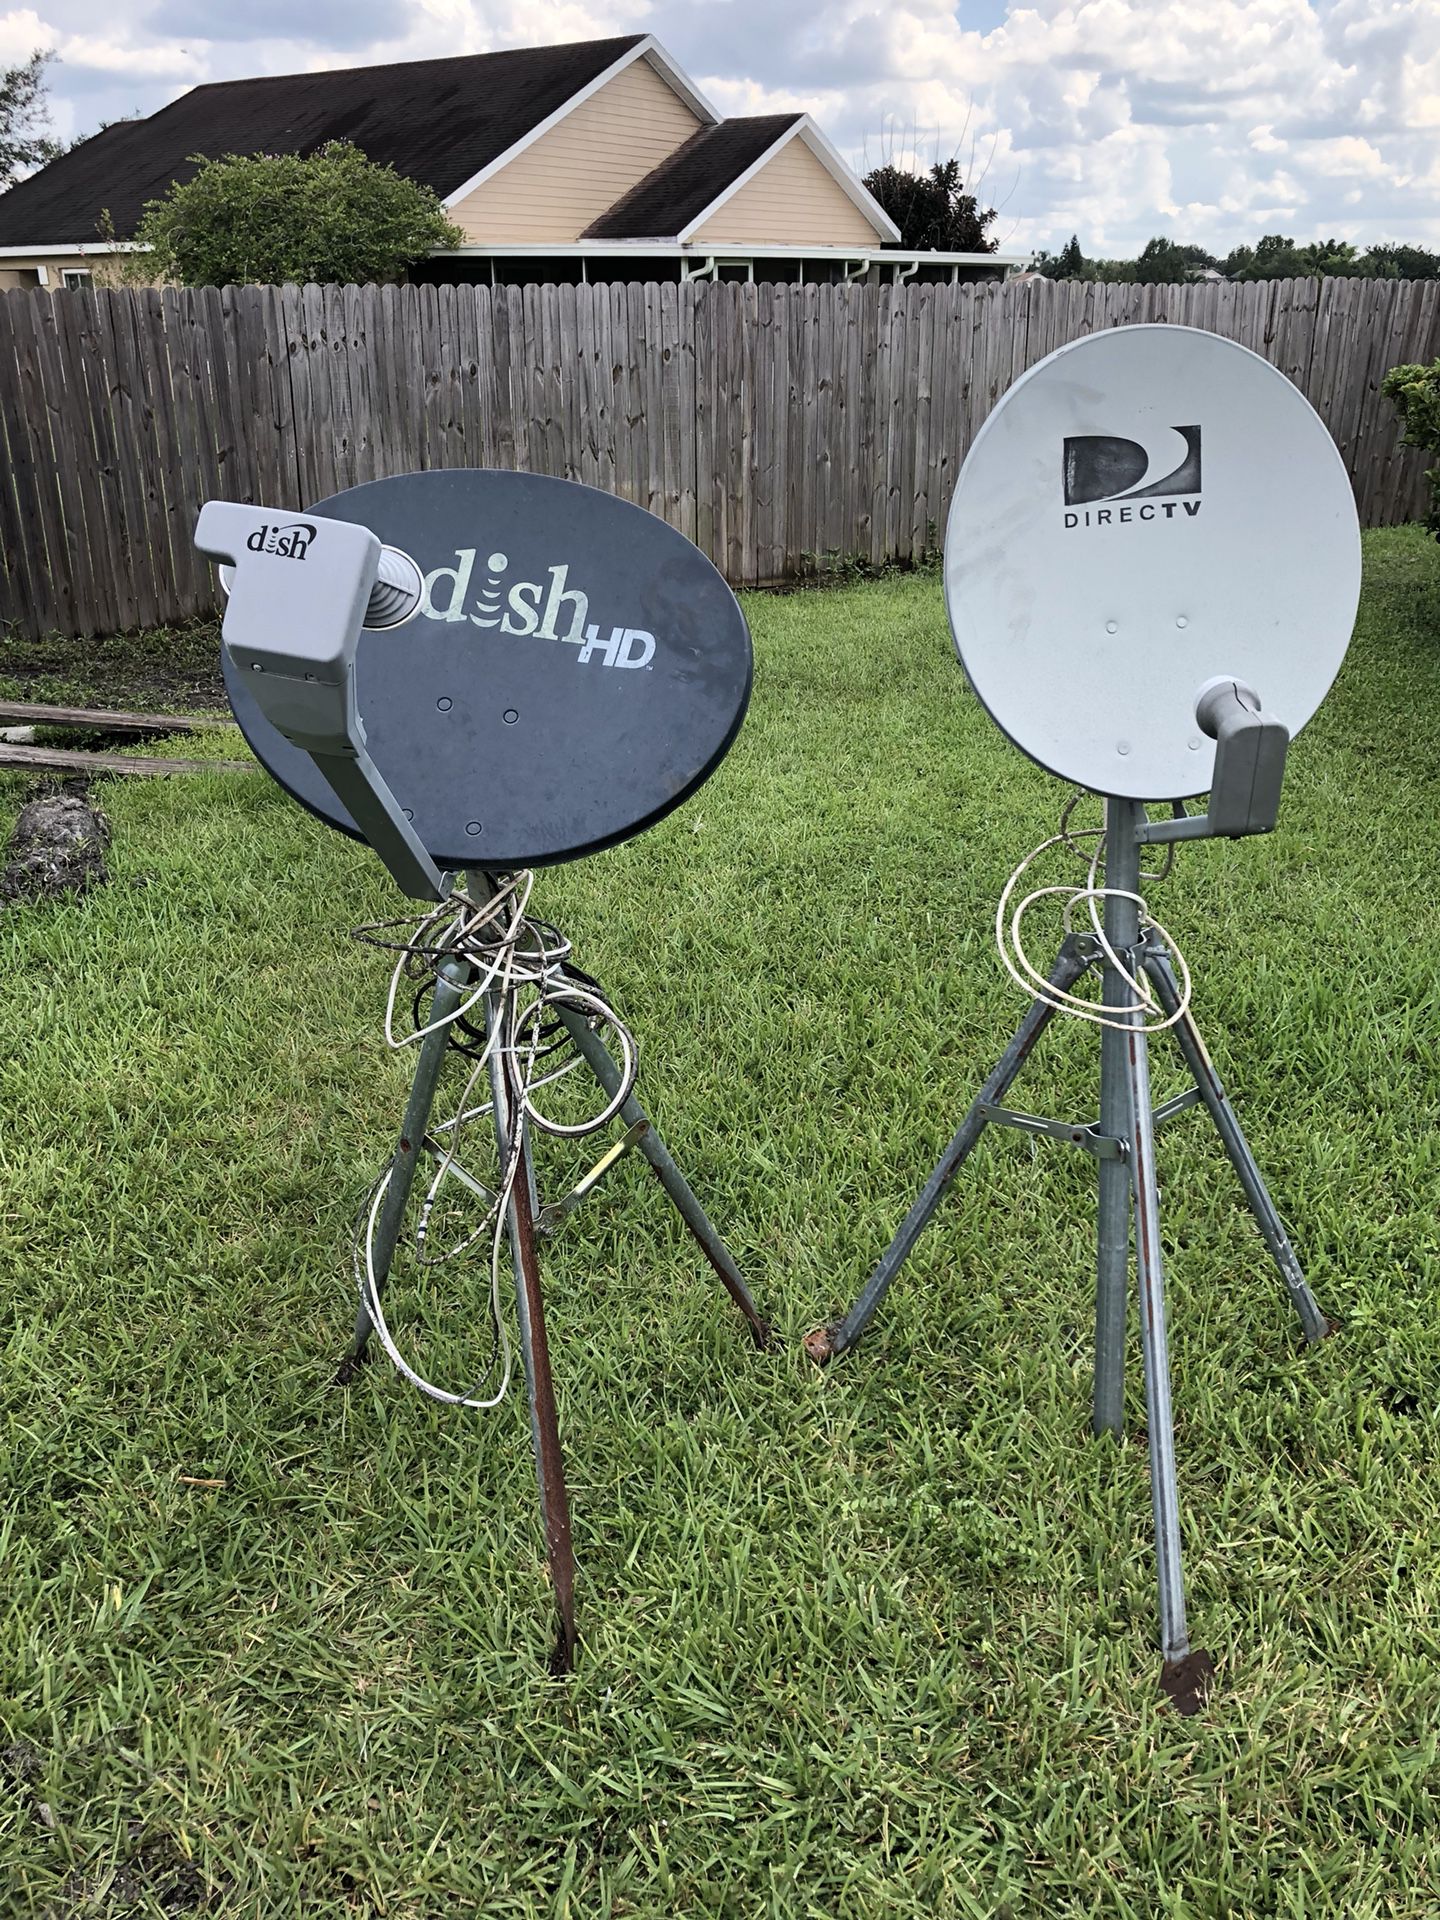 Only have DISH NETWORK Satellite Dish 📡 left. Direct TV Dish SOLD!